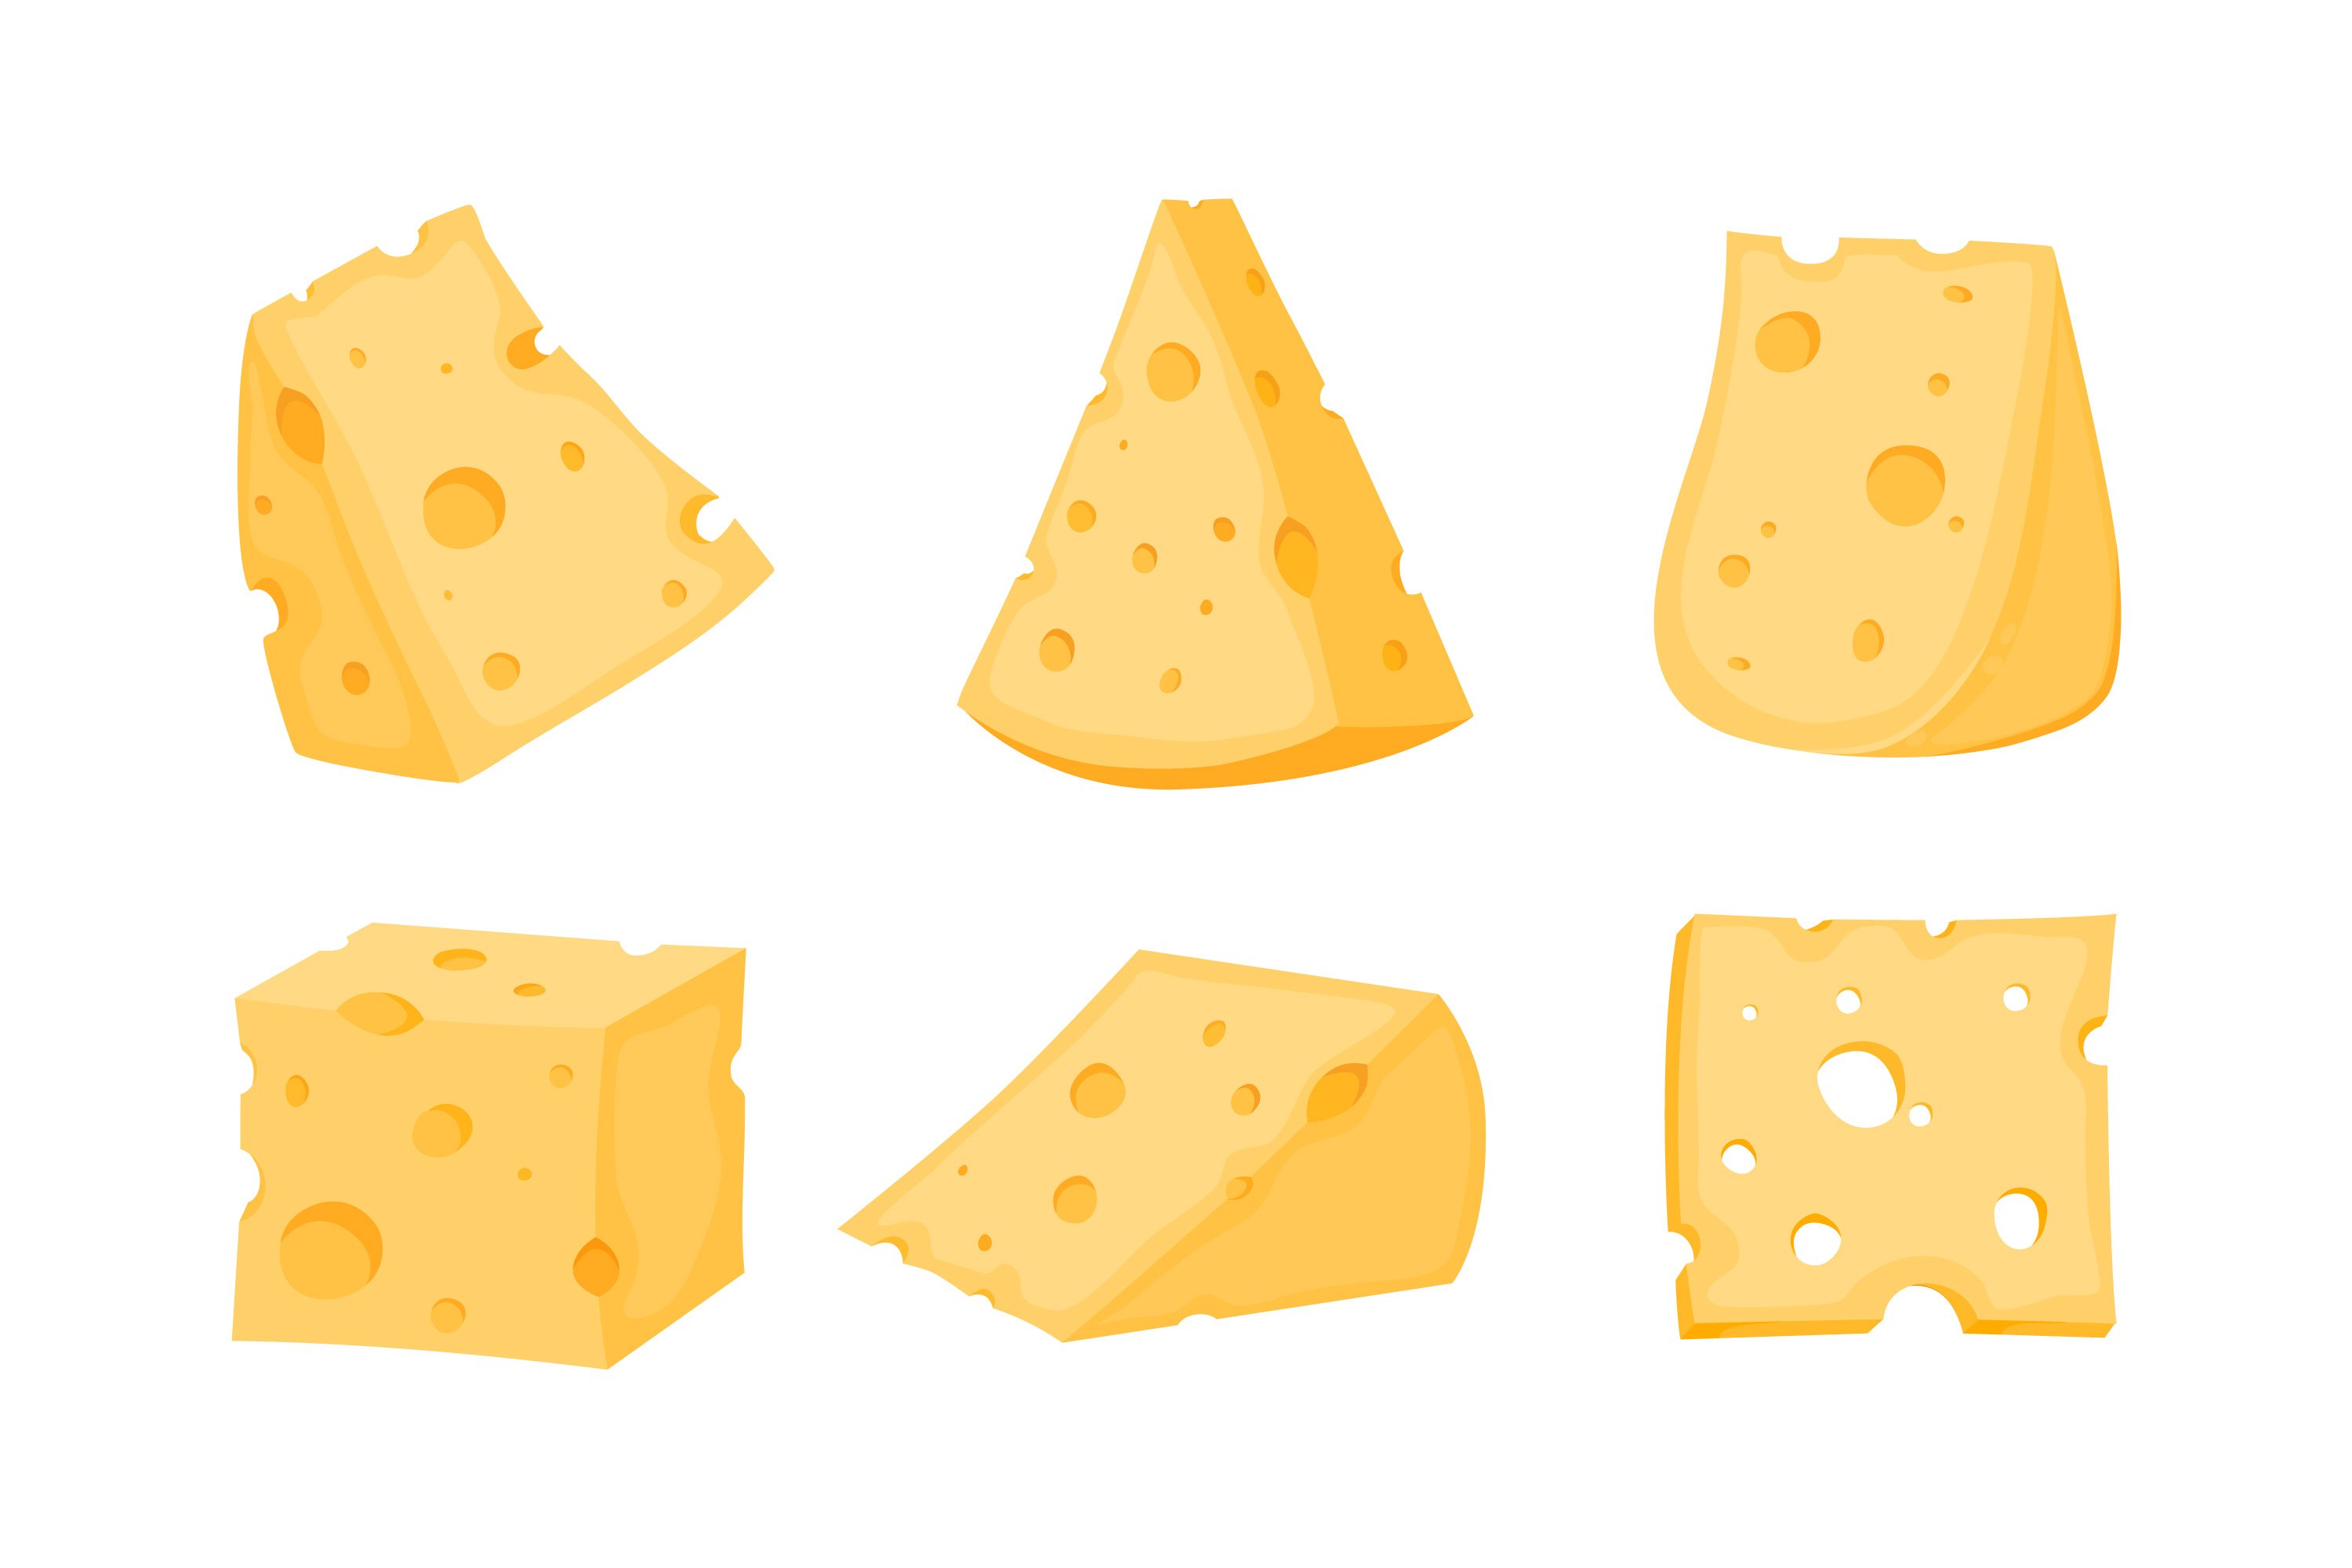 Cartoon image of pieces of hard cheese.